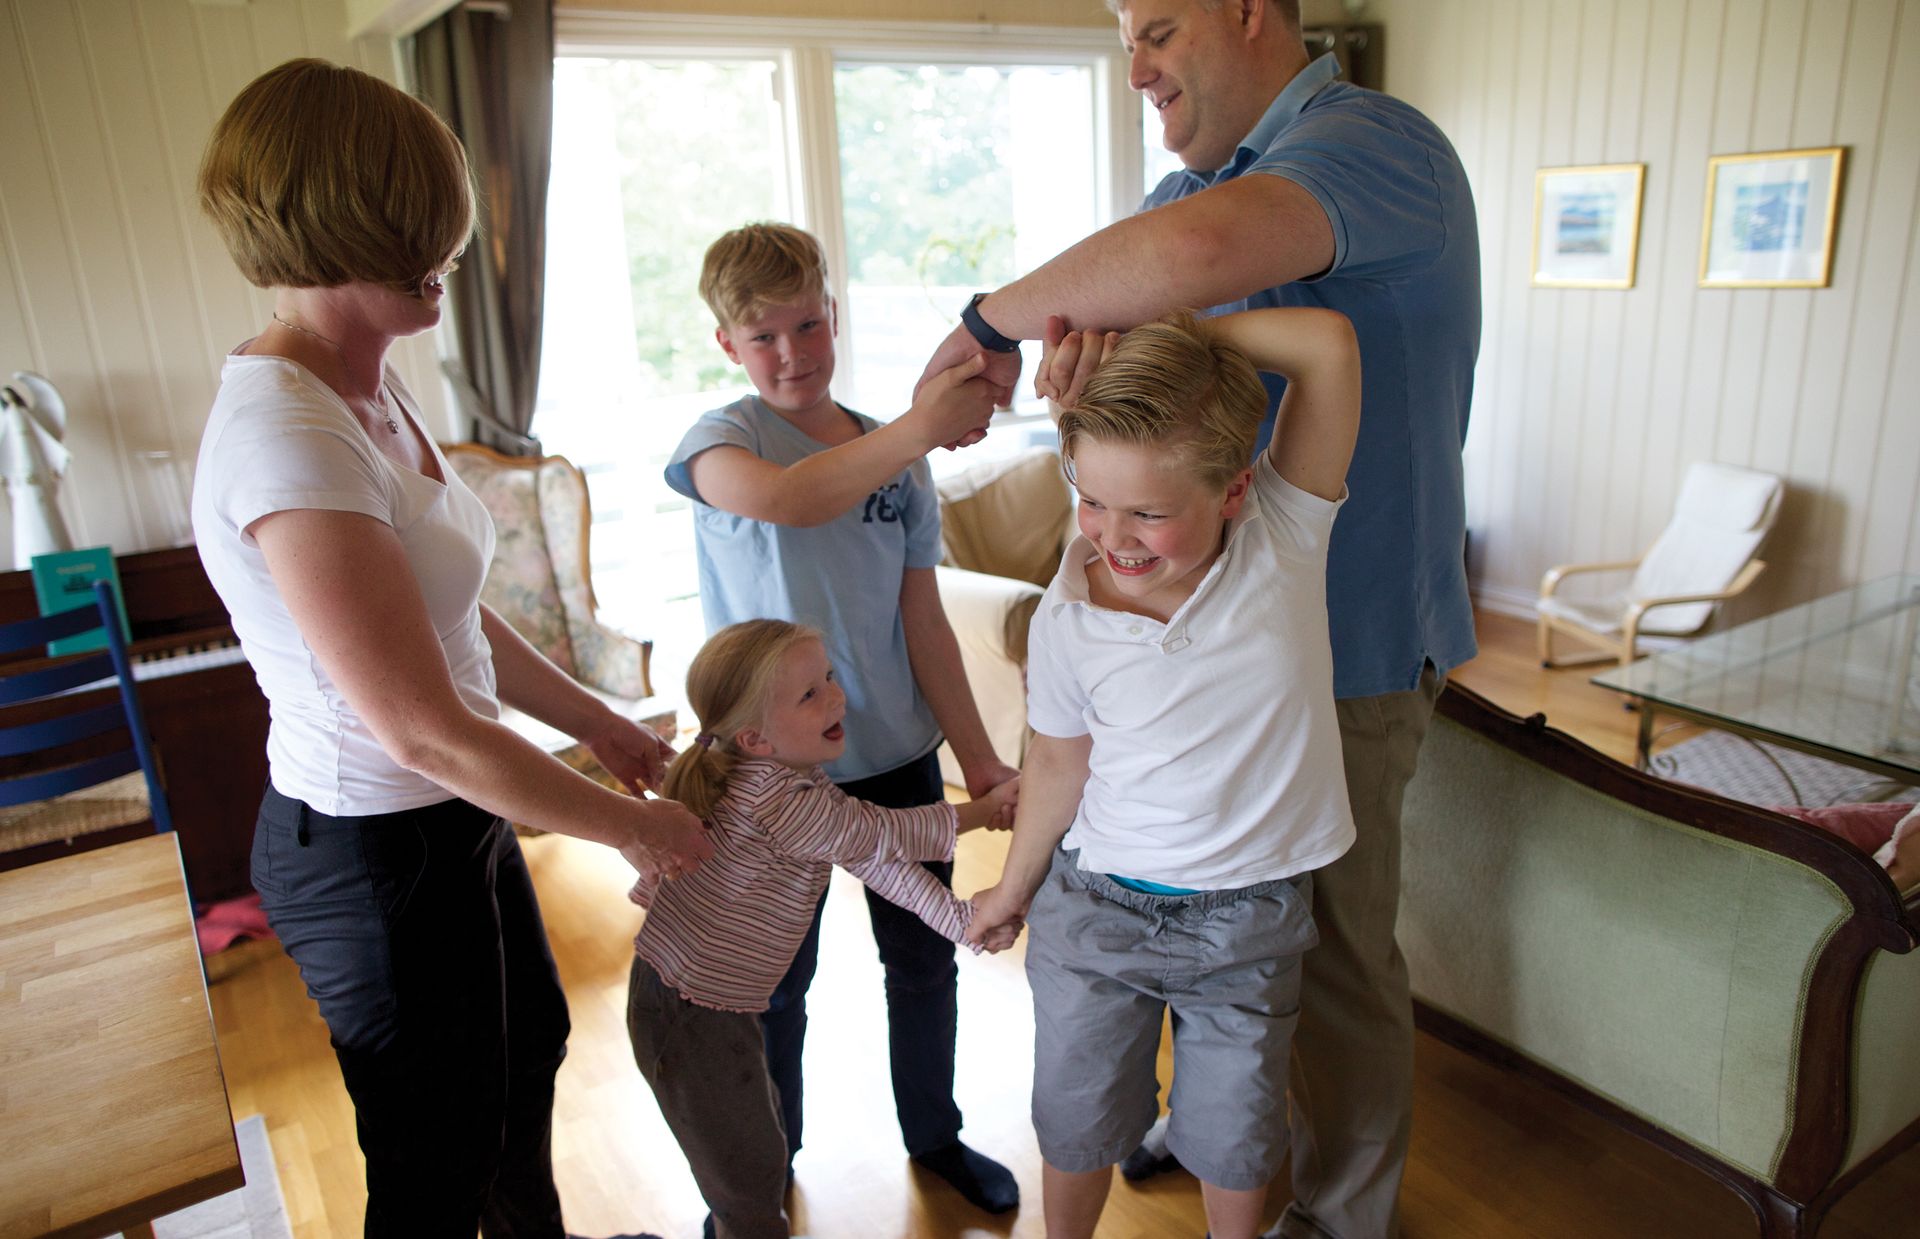 The Karlssons enjoy a favorite game called “family knot.” To play, everyone stands in a circle and holds hands while one person, designated as the “fixer,” leaves the room. The people in the circle jumble up their positions without breaking their grasp. The “fixer” then has to untangle the family knot.